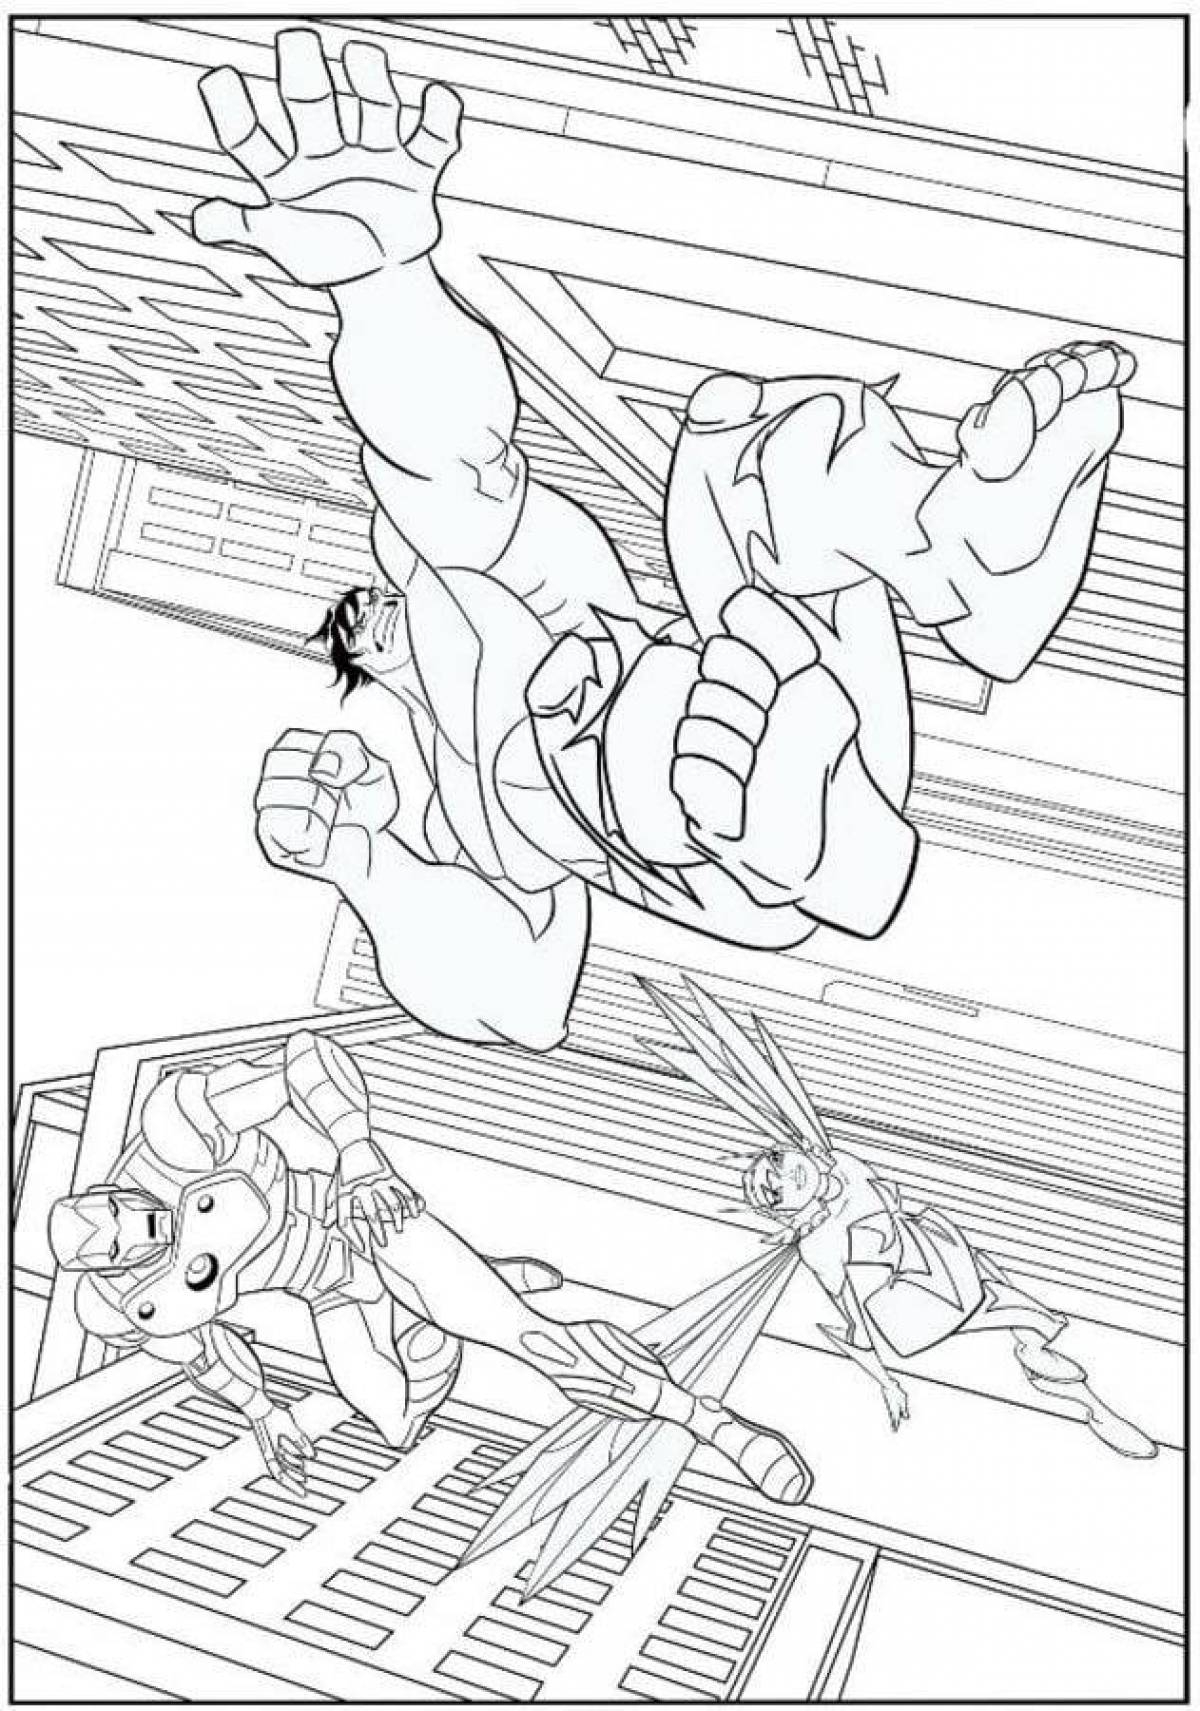 Gorgeous Tokyo Avengers coloring book